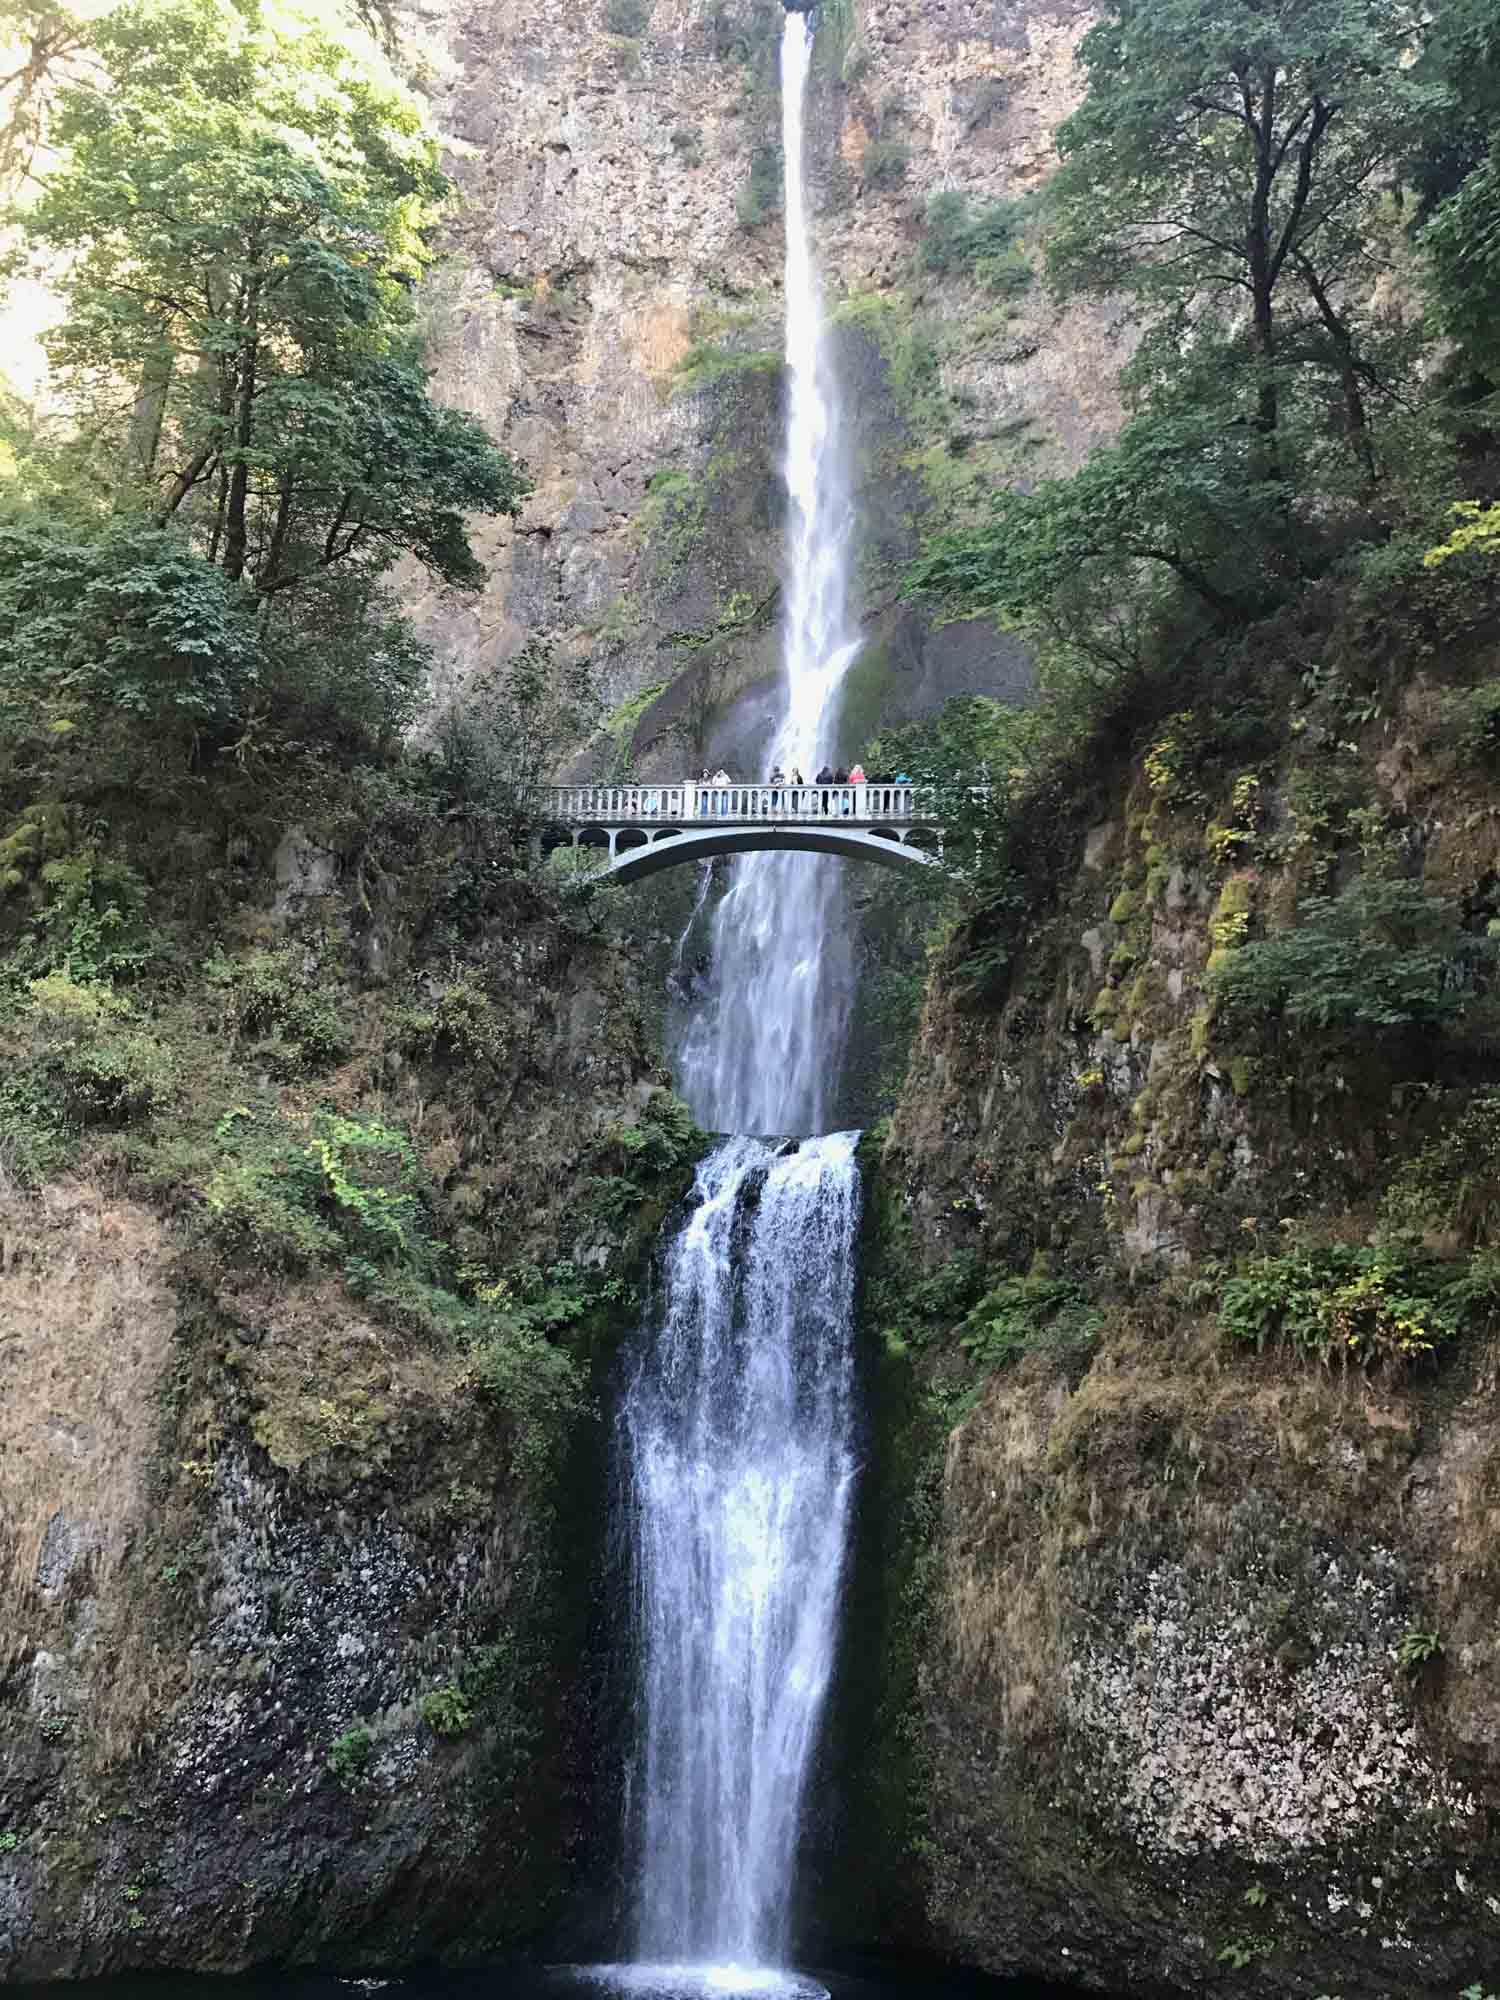 the famous multnomah falls flow from the top of a rock face with viewing bridge visible at the falls midpoint